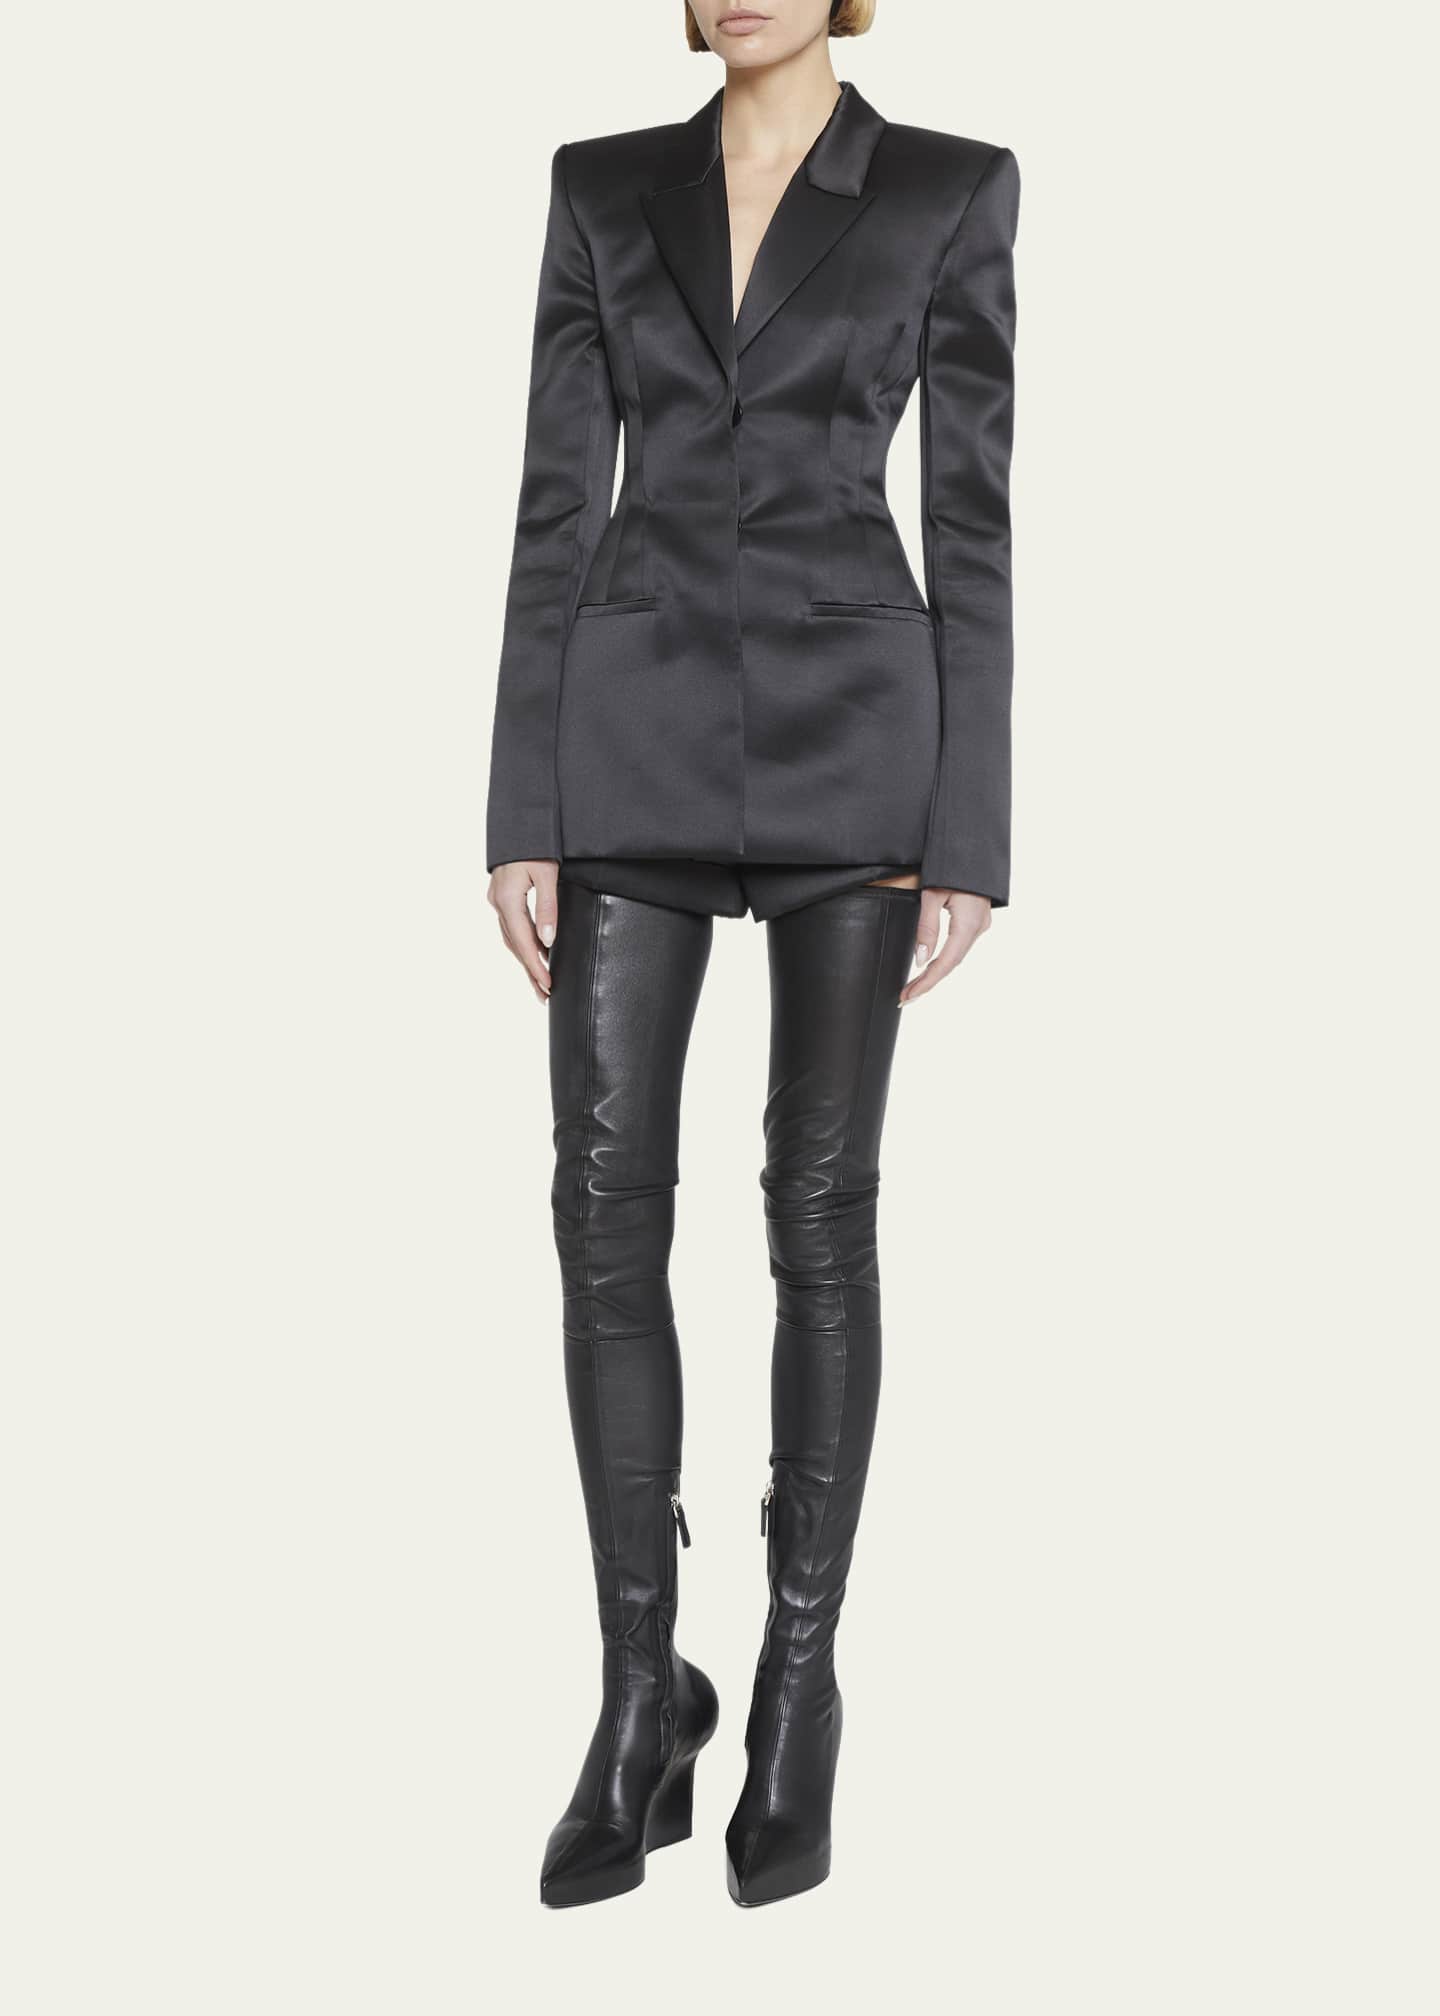 Givenchy Show Stretch Over-The-Knee Boots - Bergdorf Goodman